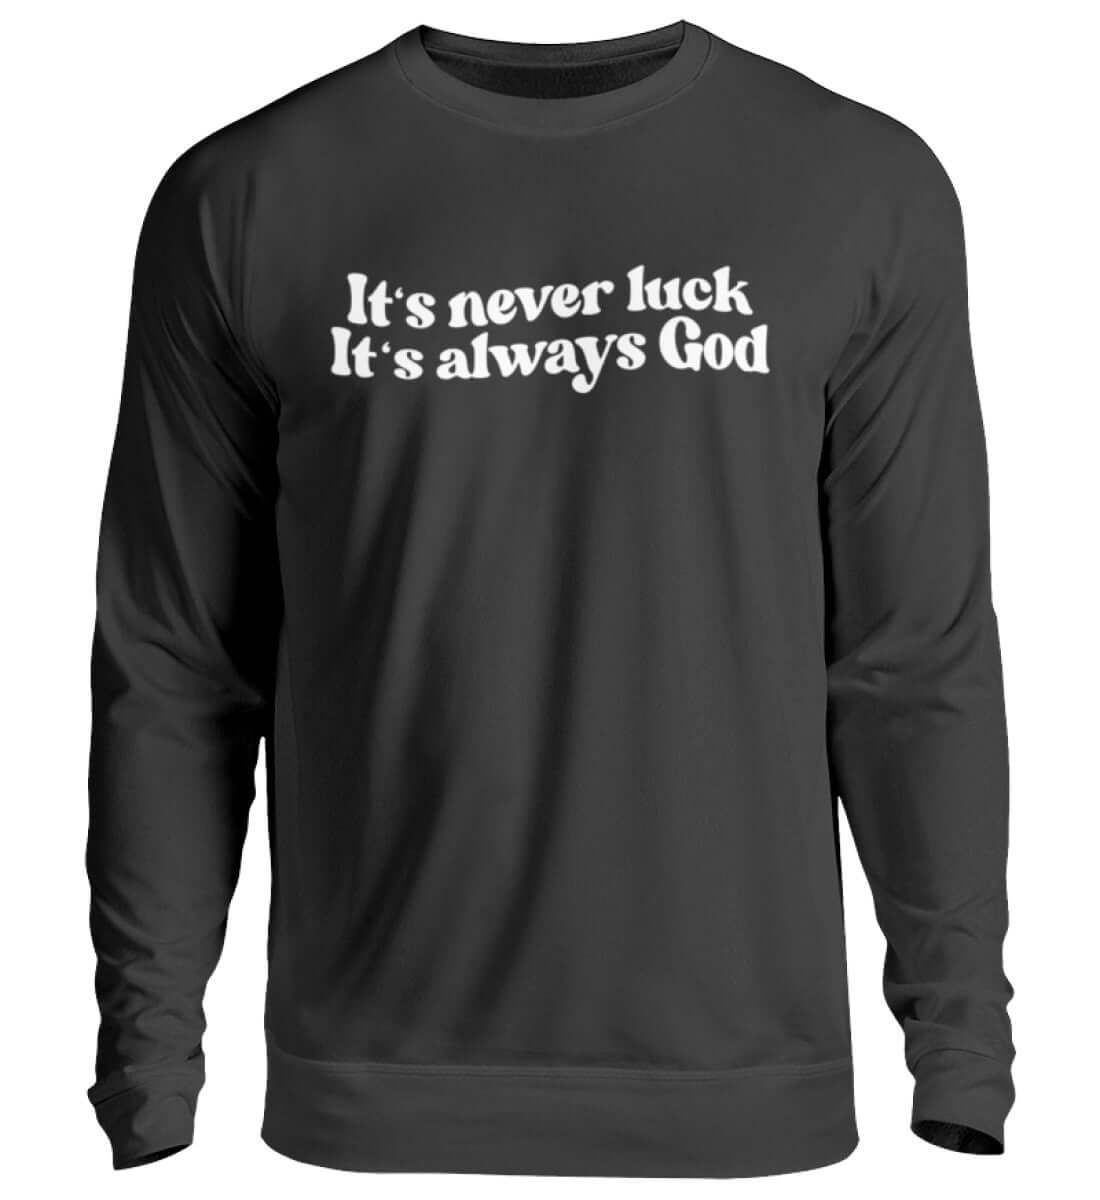 'IT'S NEVER LUCK IT'S ALWAYS GOD' - Unisex Pullover - GODVIBES